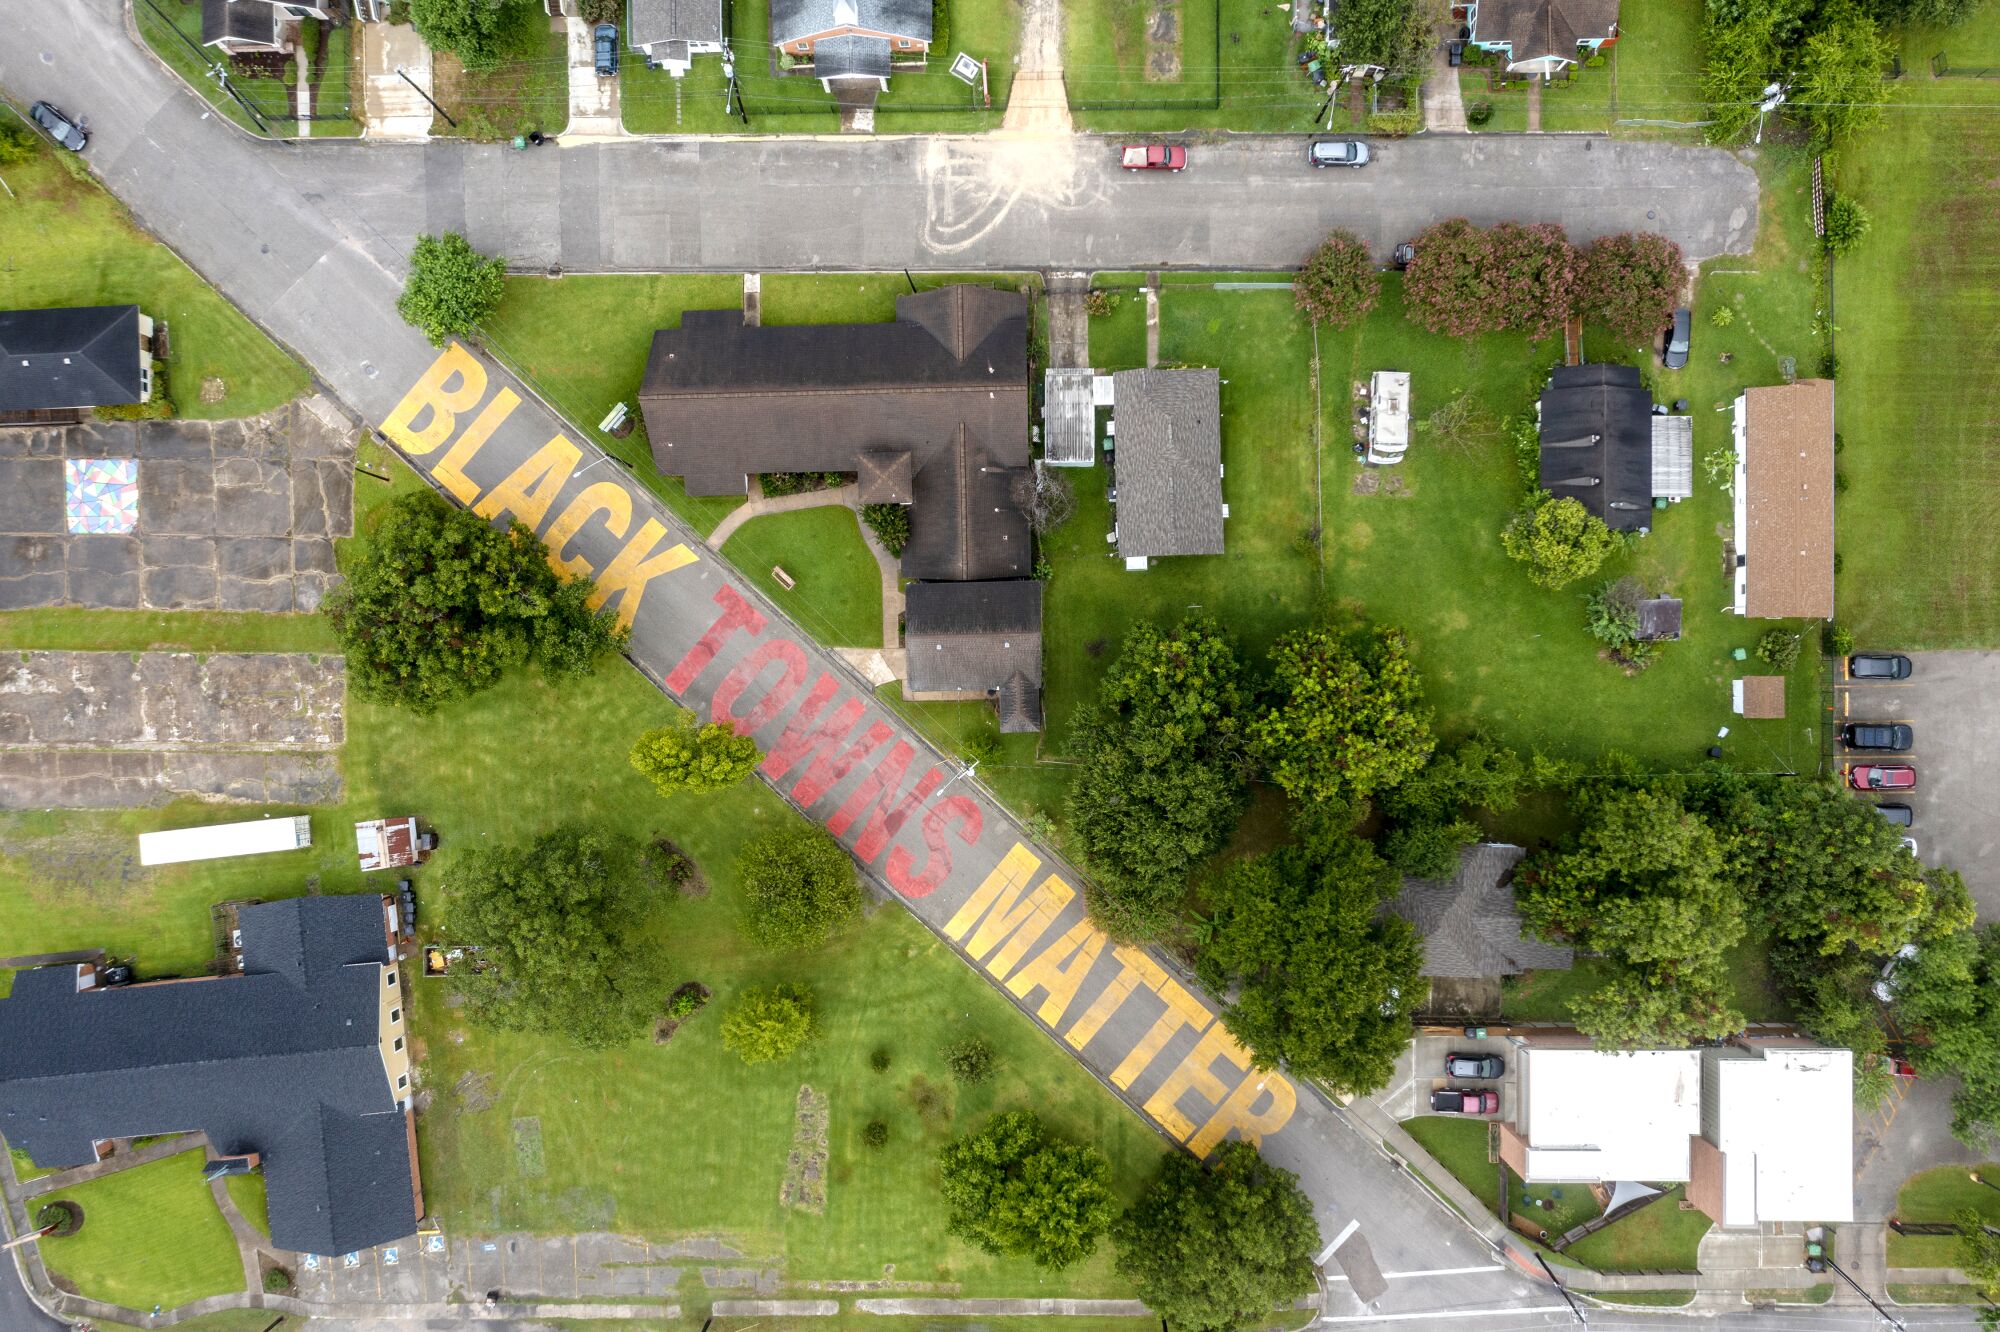 Aug. 18: An aerial view of a road with Black Towns Matter painted on it